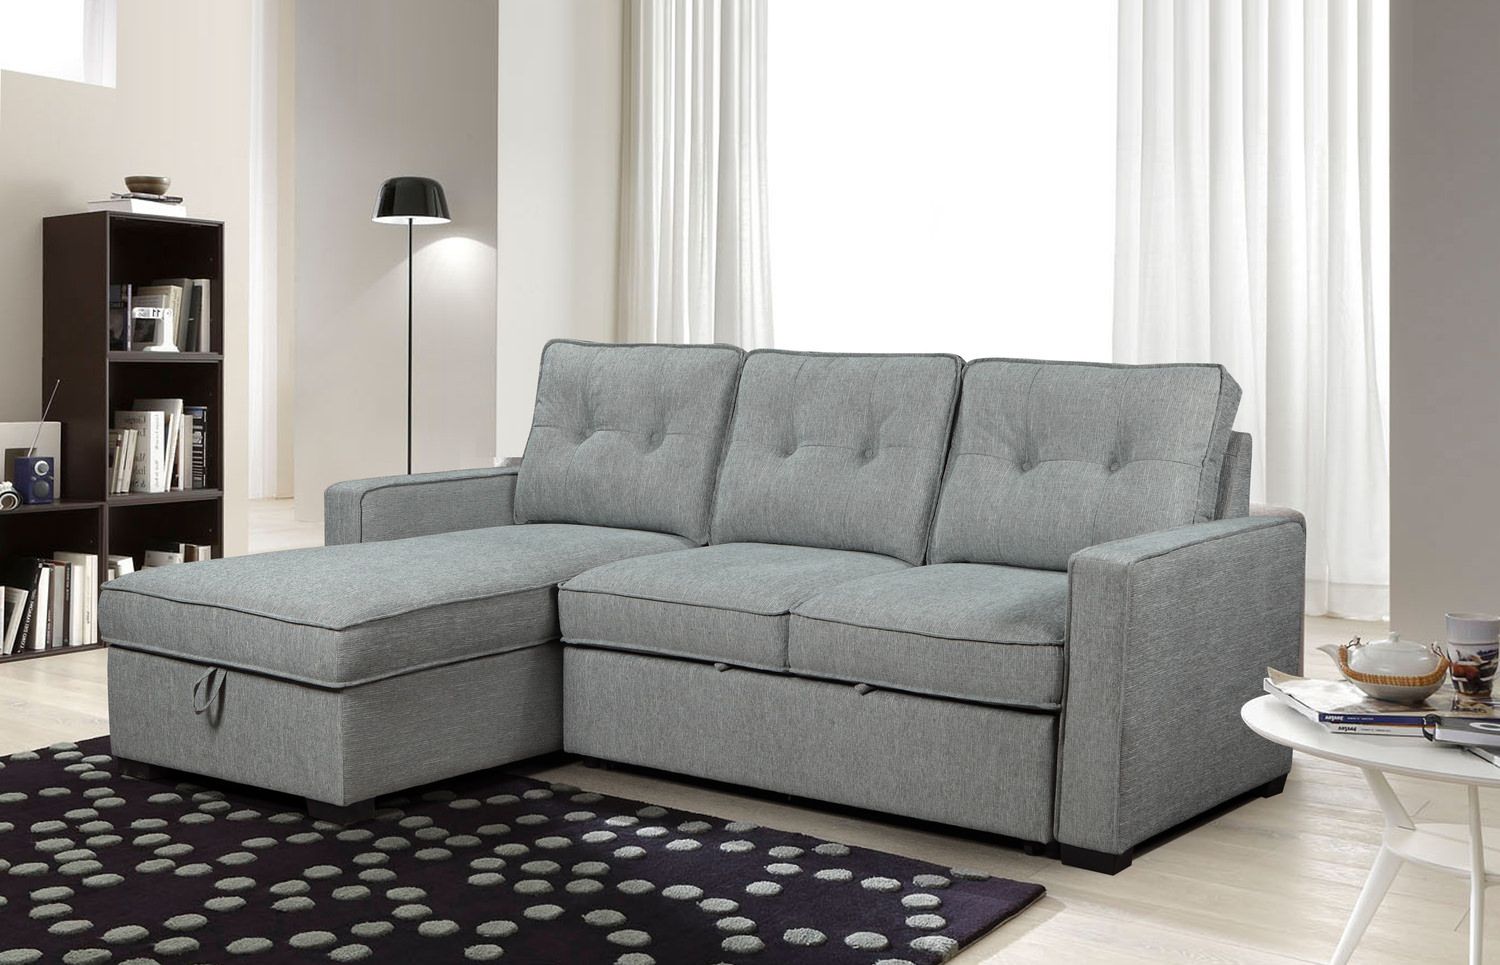 Casper 2 Piece Modular Sectional With Pull & | Hom Furniture Throughout Convertible Sofa With Matching Chaise (View 15 of 20)